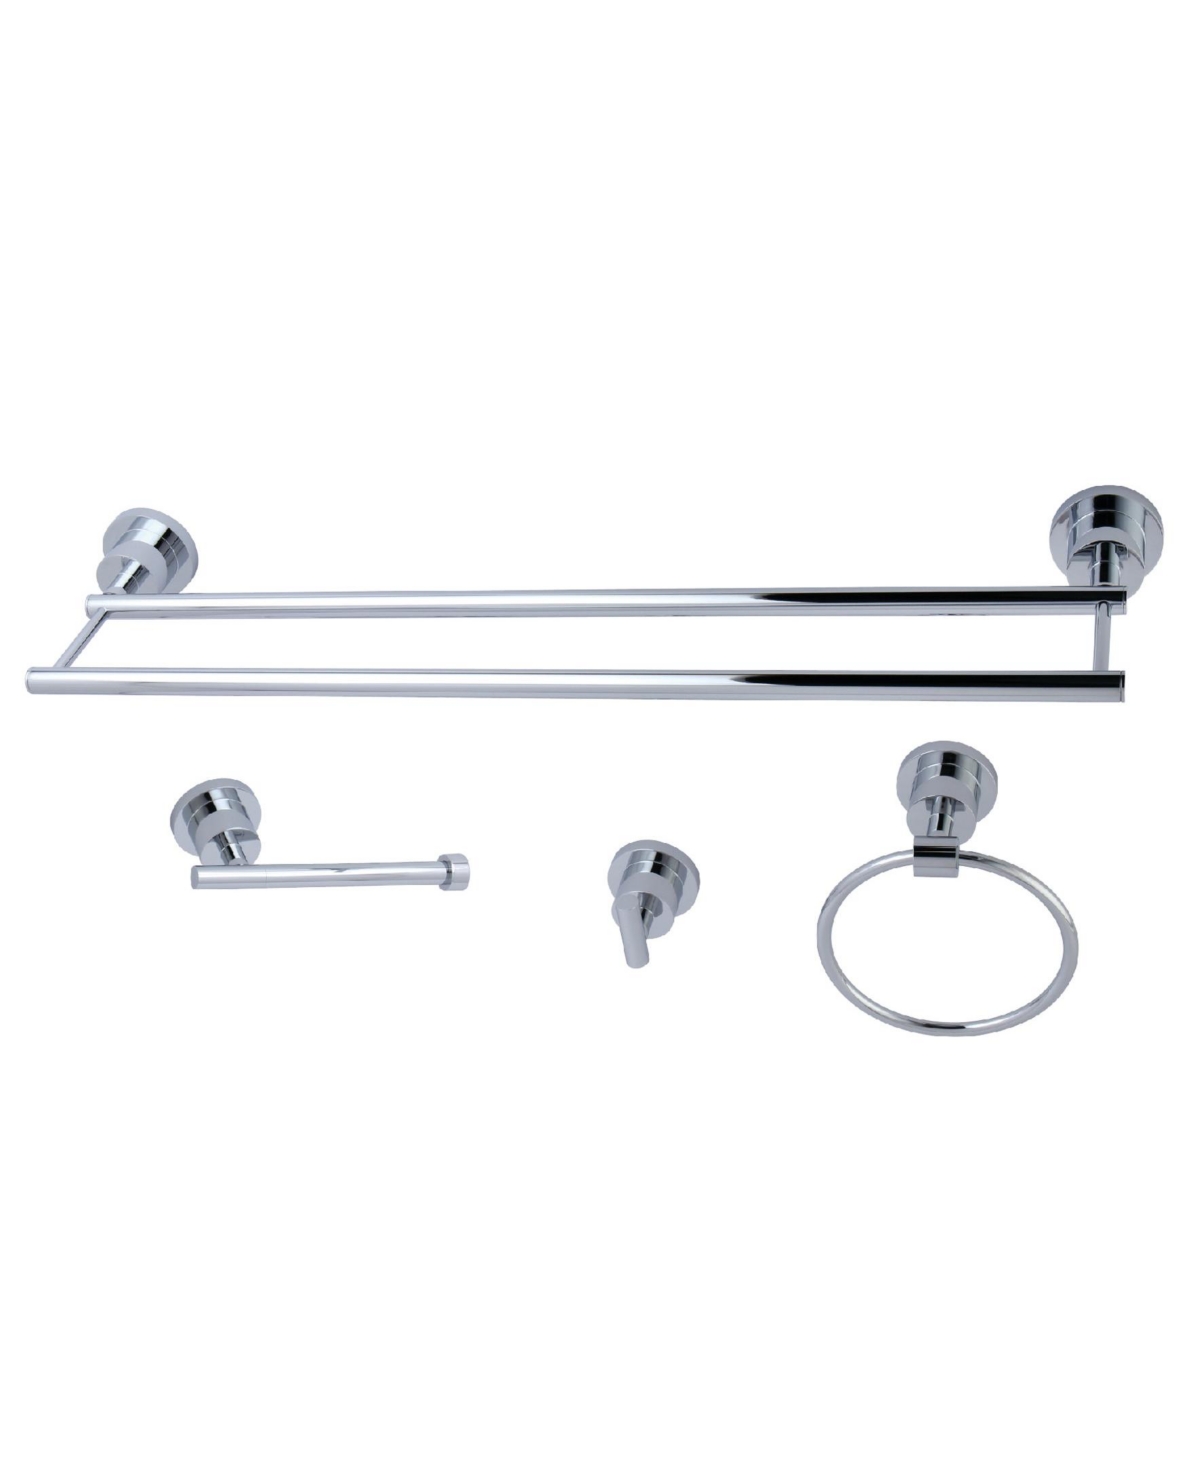 Kingston Brass Concord 4-Pc Dual Towel Bar Bathroom Accessories Set in Polished Chrome Bedding